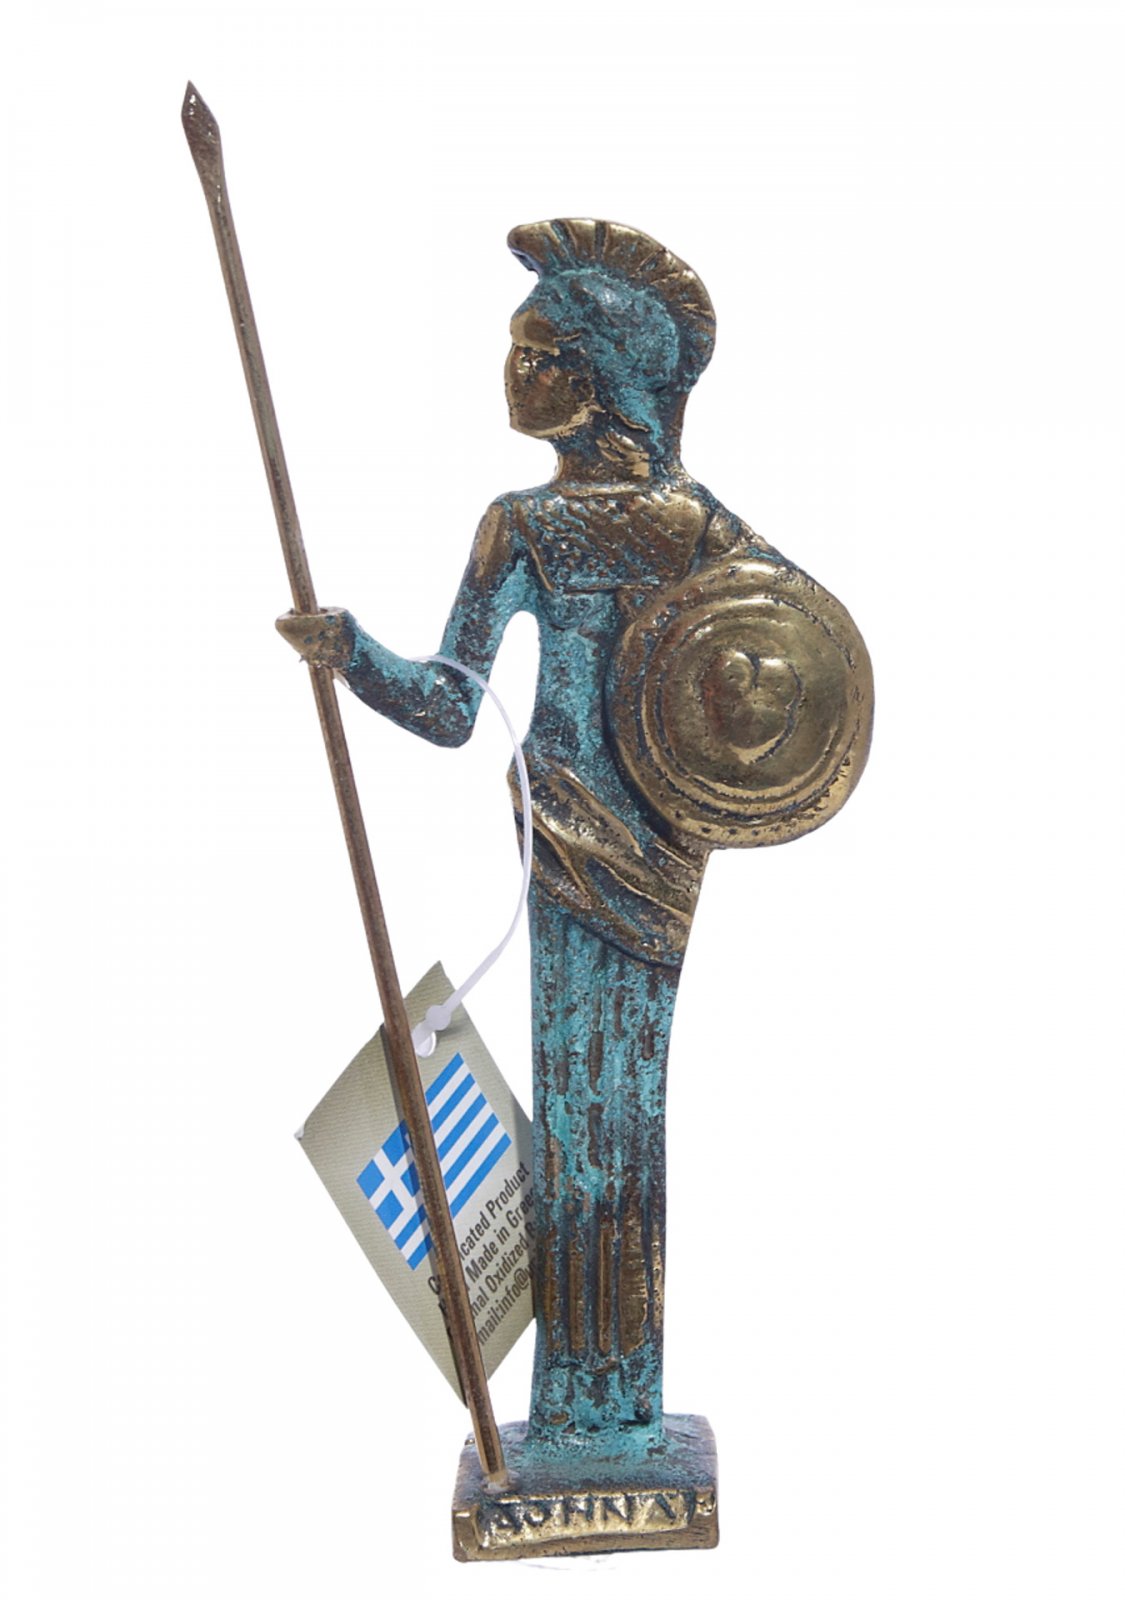 Small bronze statue of Goddess Athena holding her shield and spear